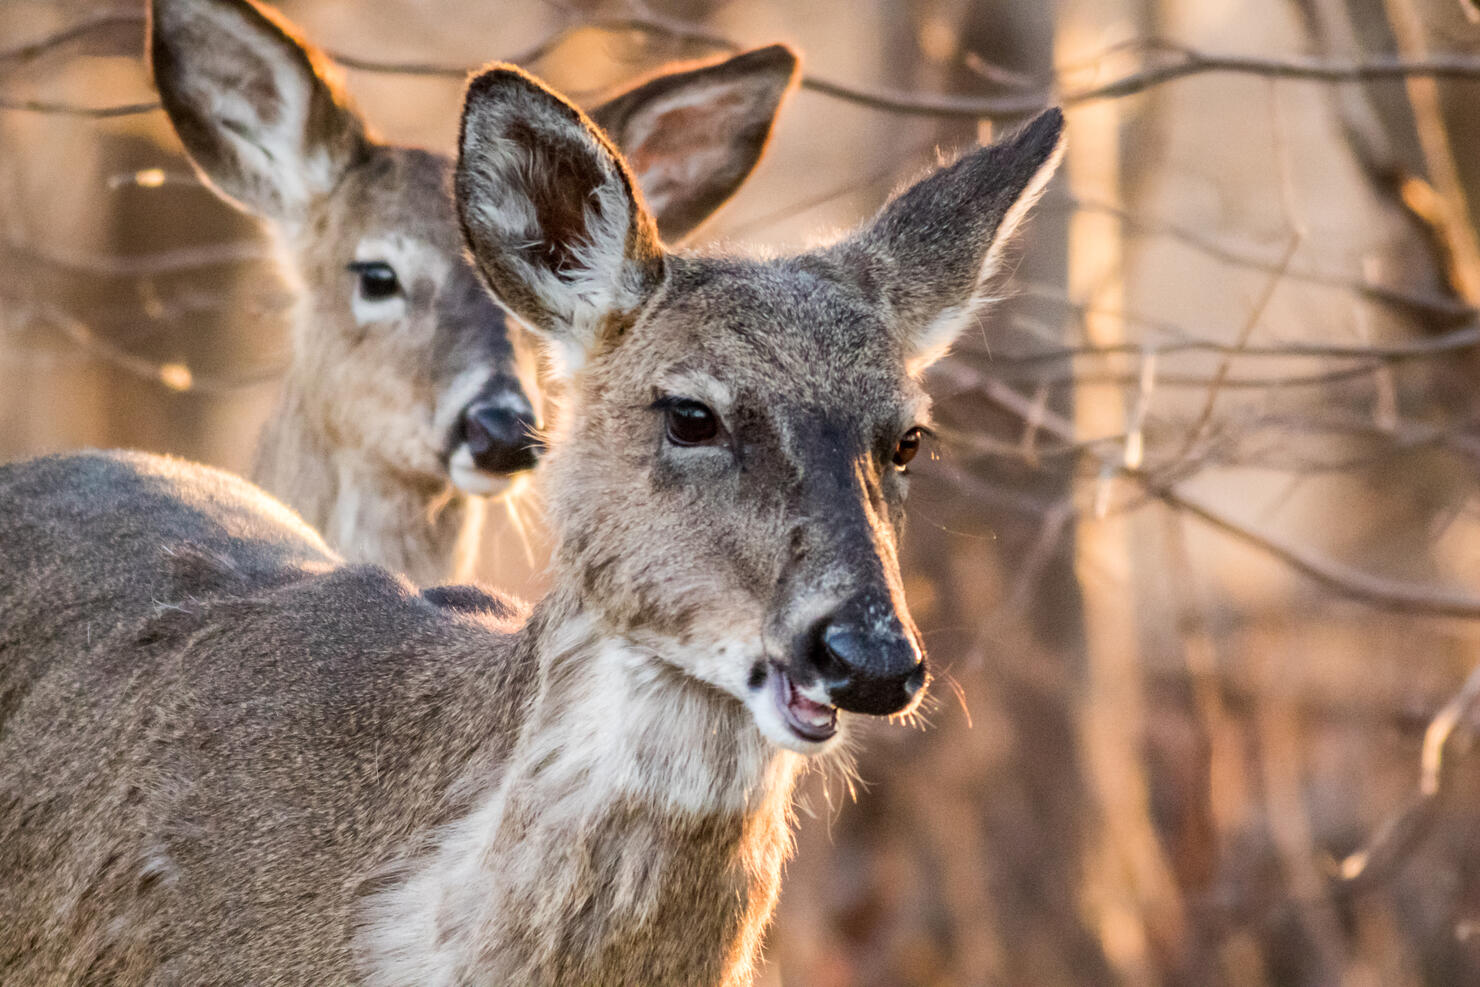 White Tailed Deer foraging in beautiful light at dusk